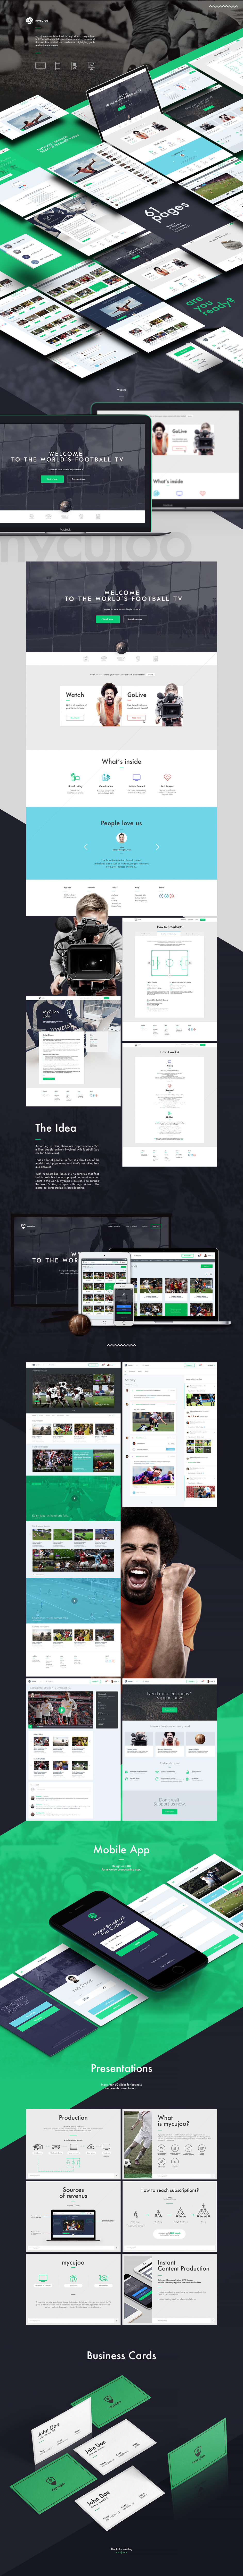 soccer ux football ball fan stadium fans broadcasting Streaming pitch